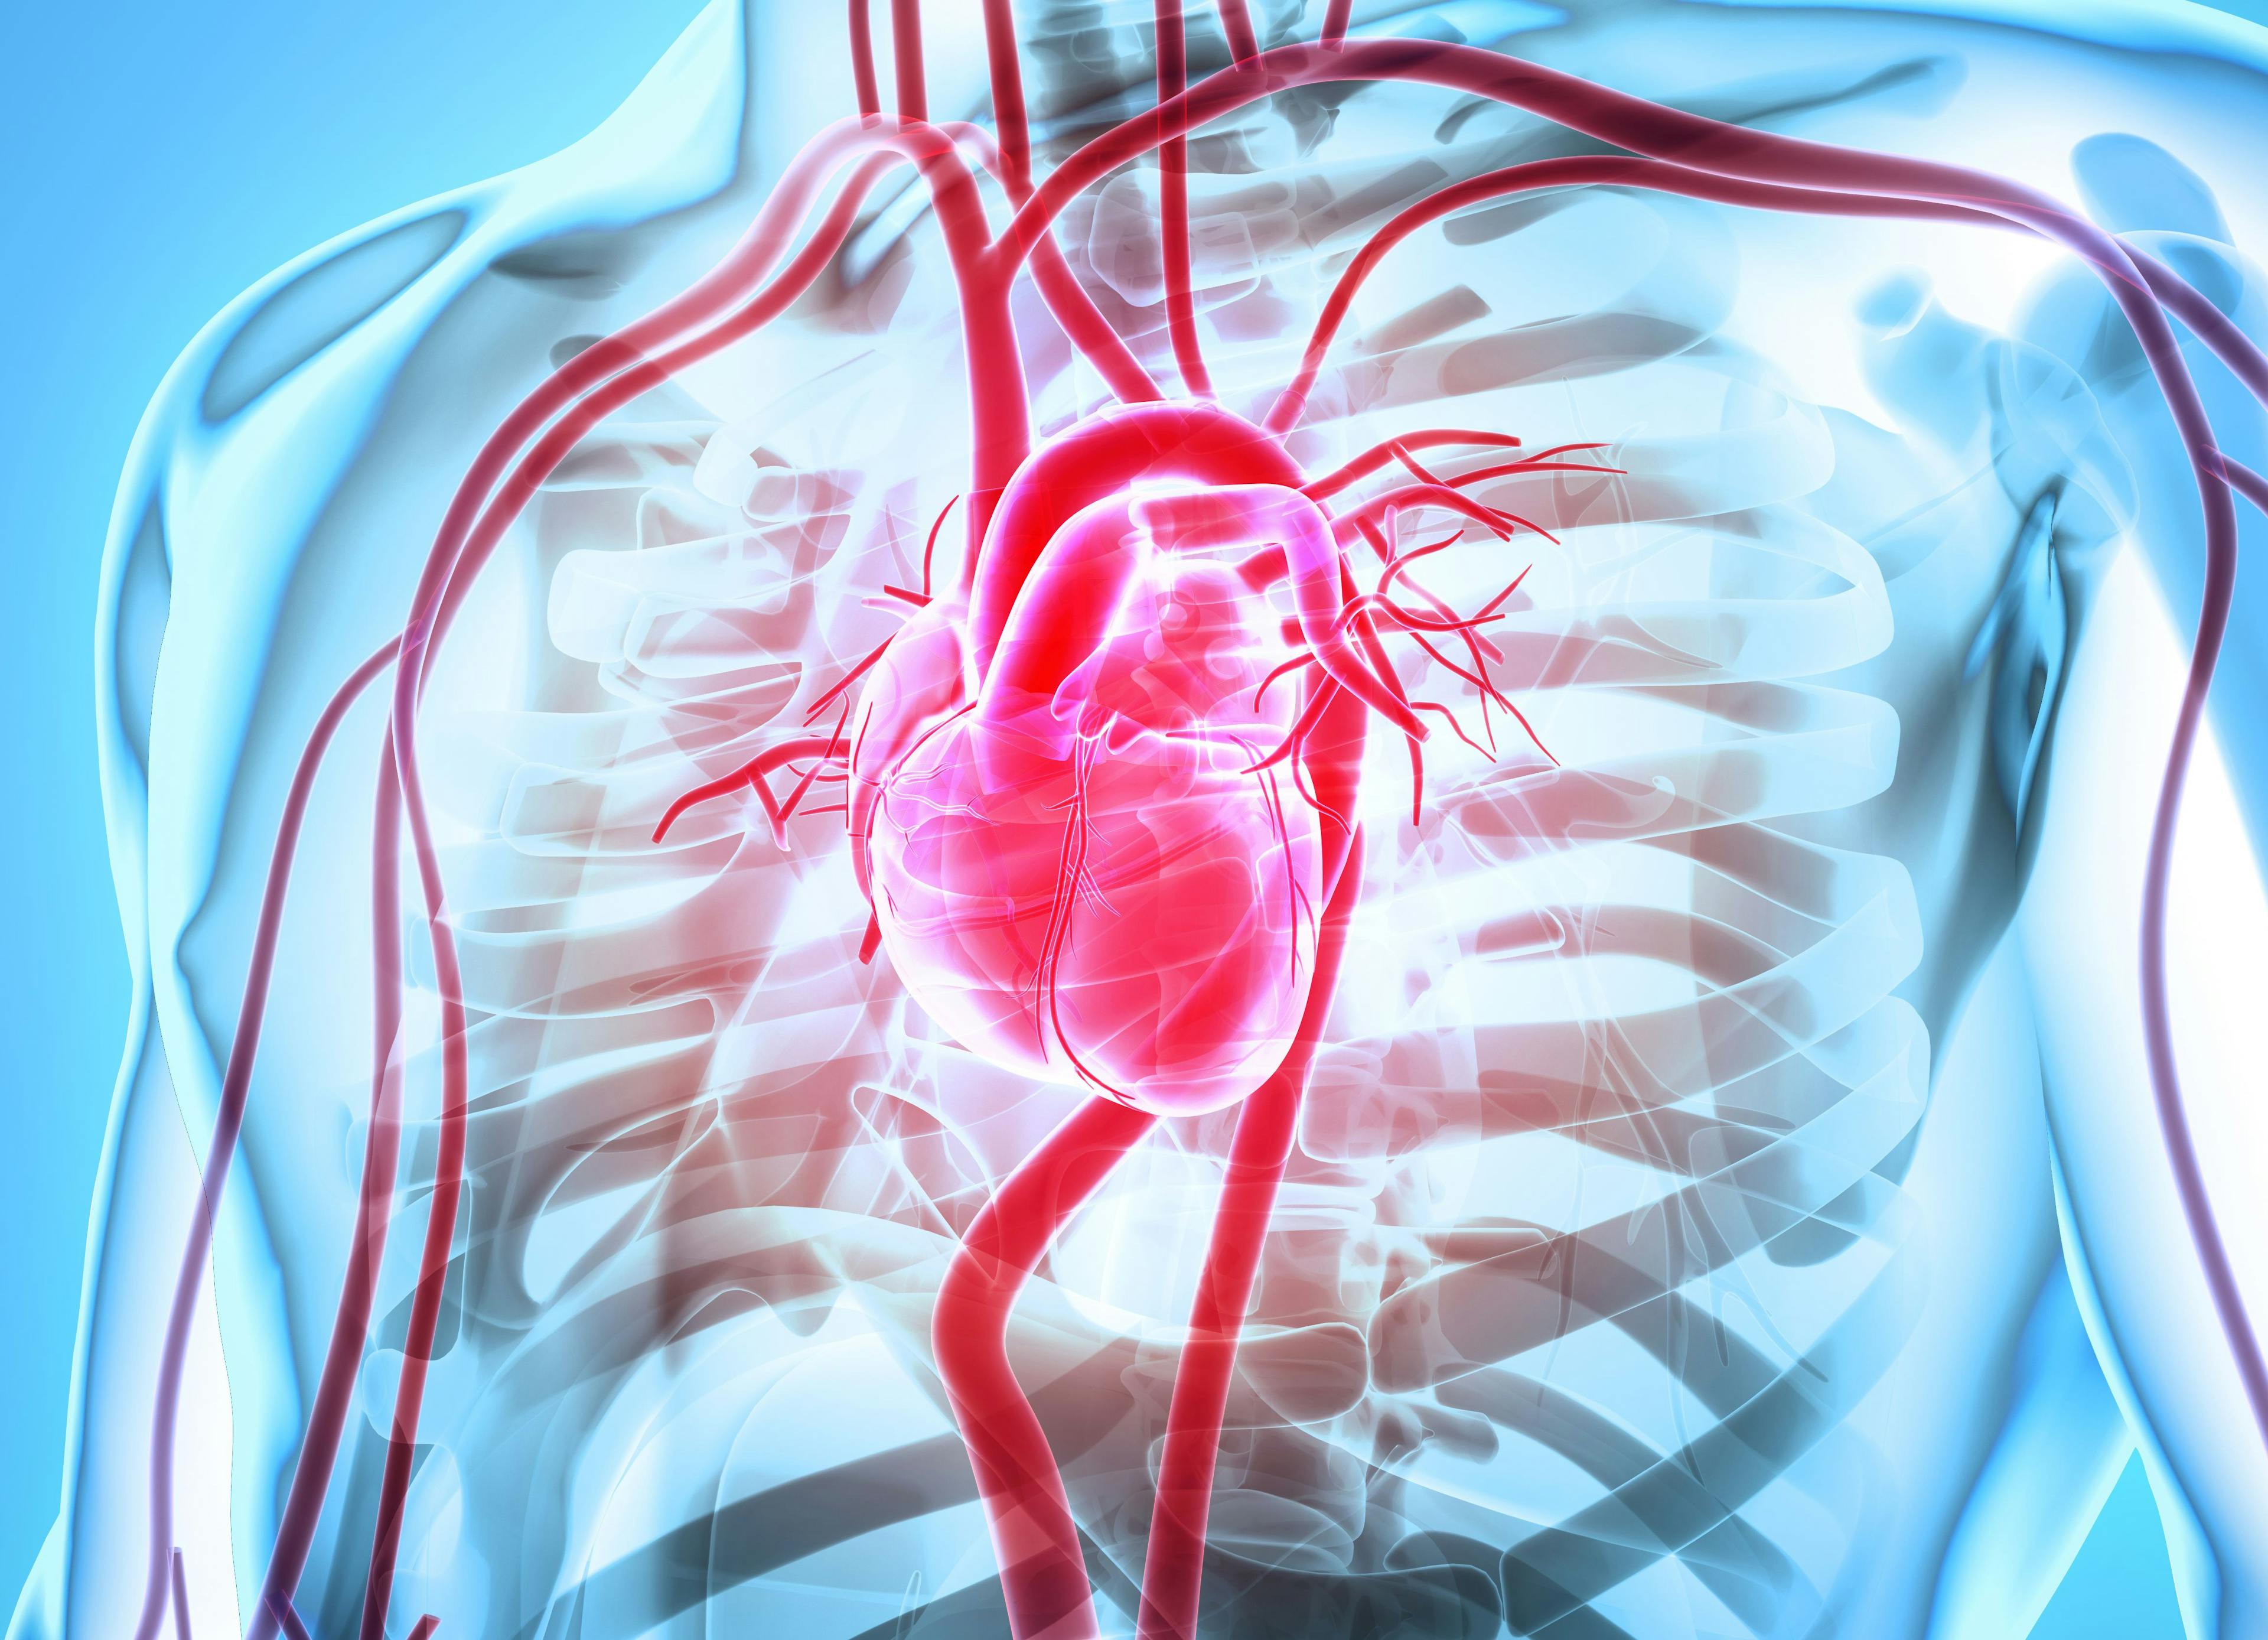 Study Details Incidence, Mortality Trends Related to Surgical Explantation in TAVR Patients